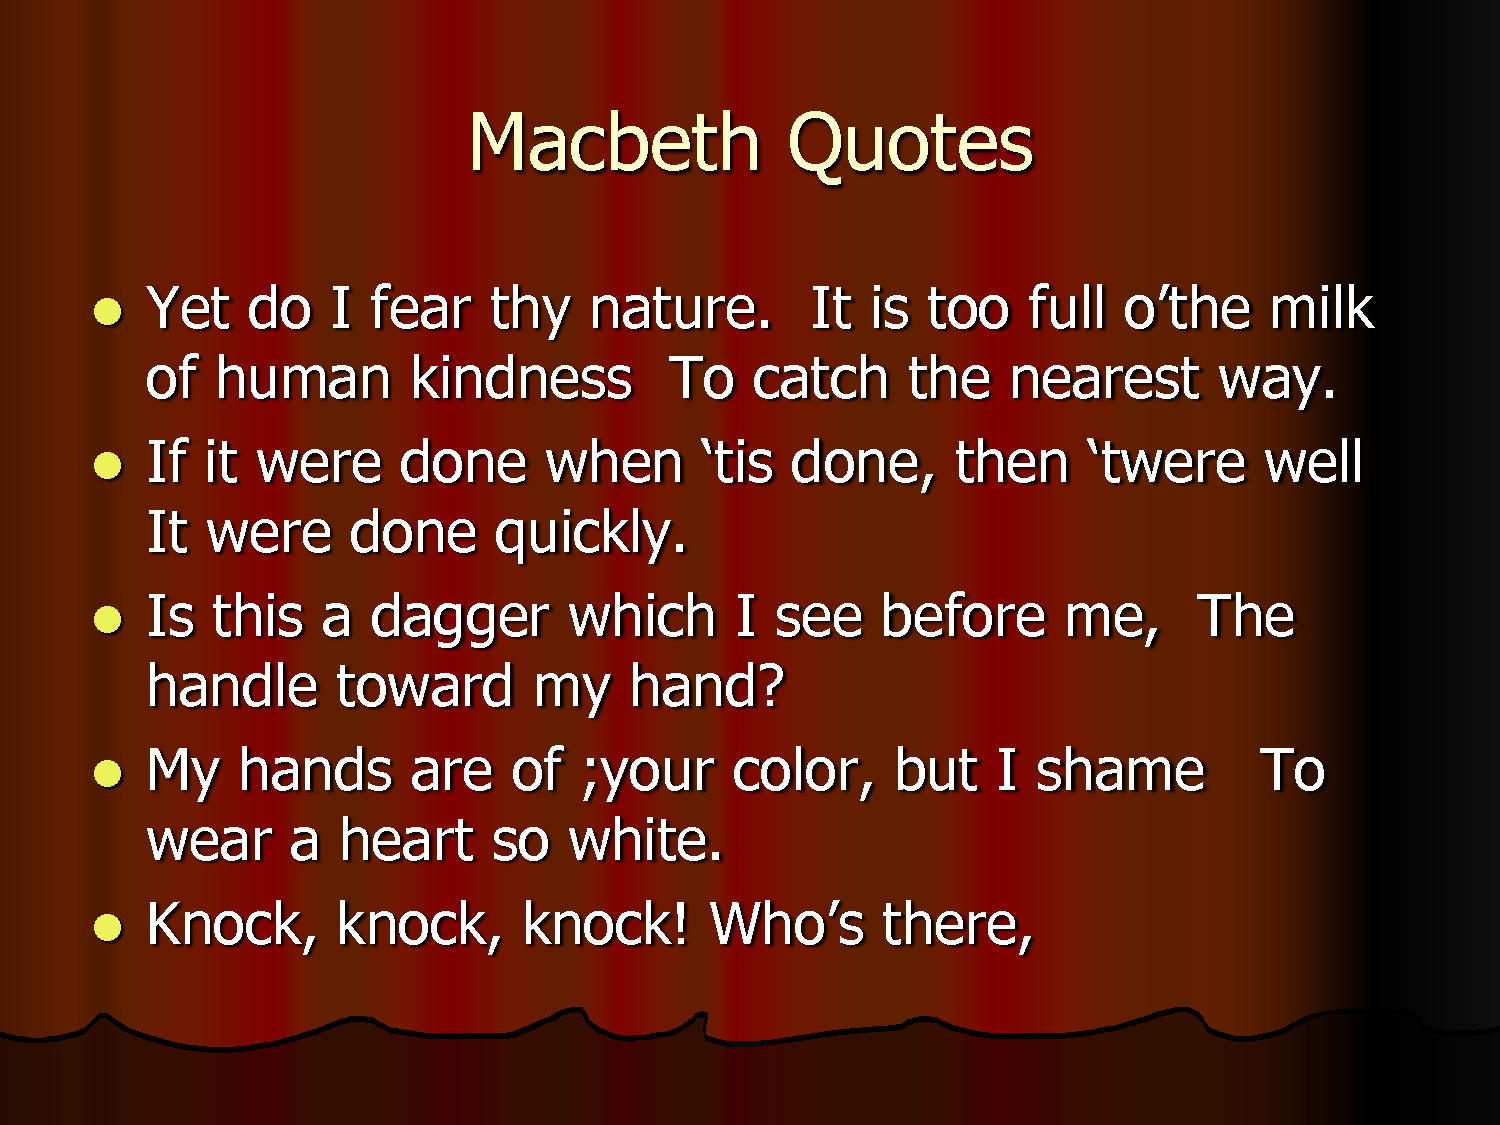 good essay quotes from macbeth